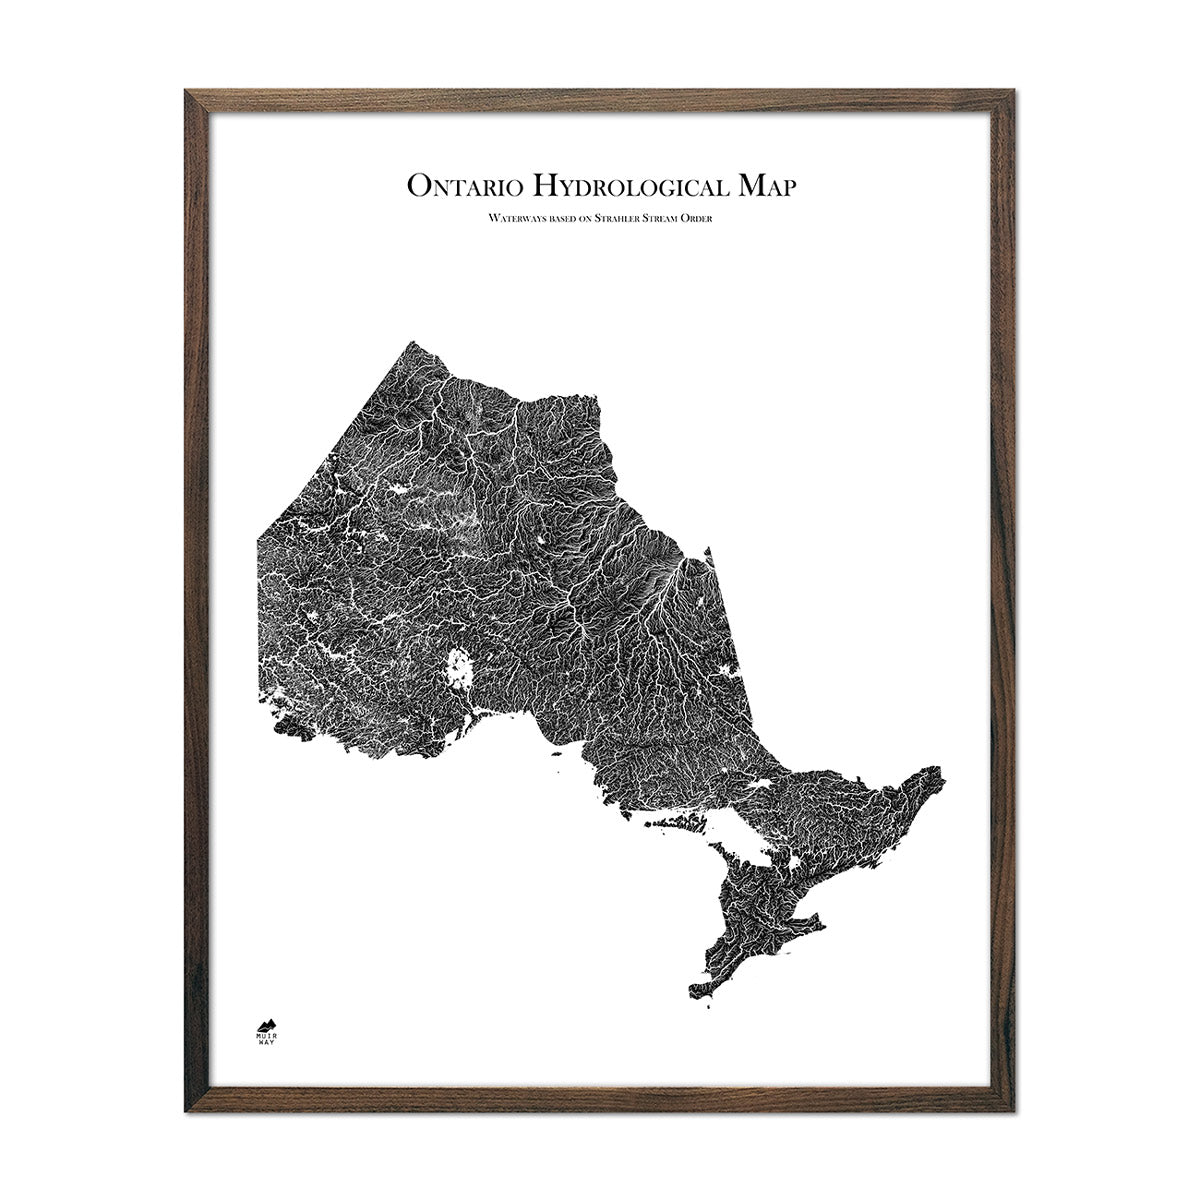 Ontario Hydrological Map